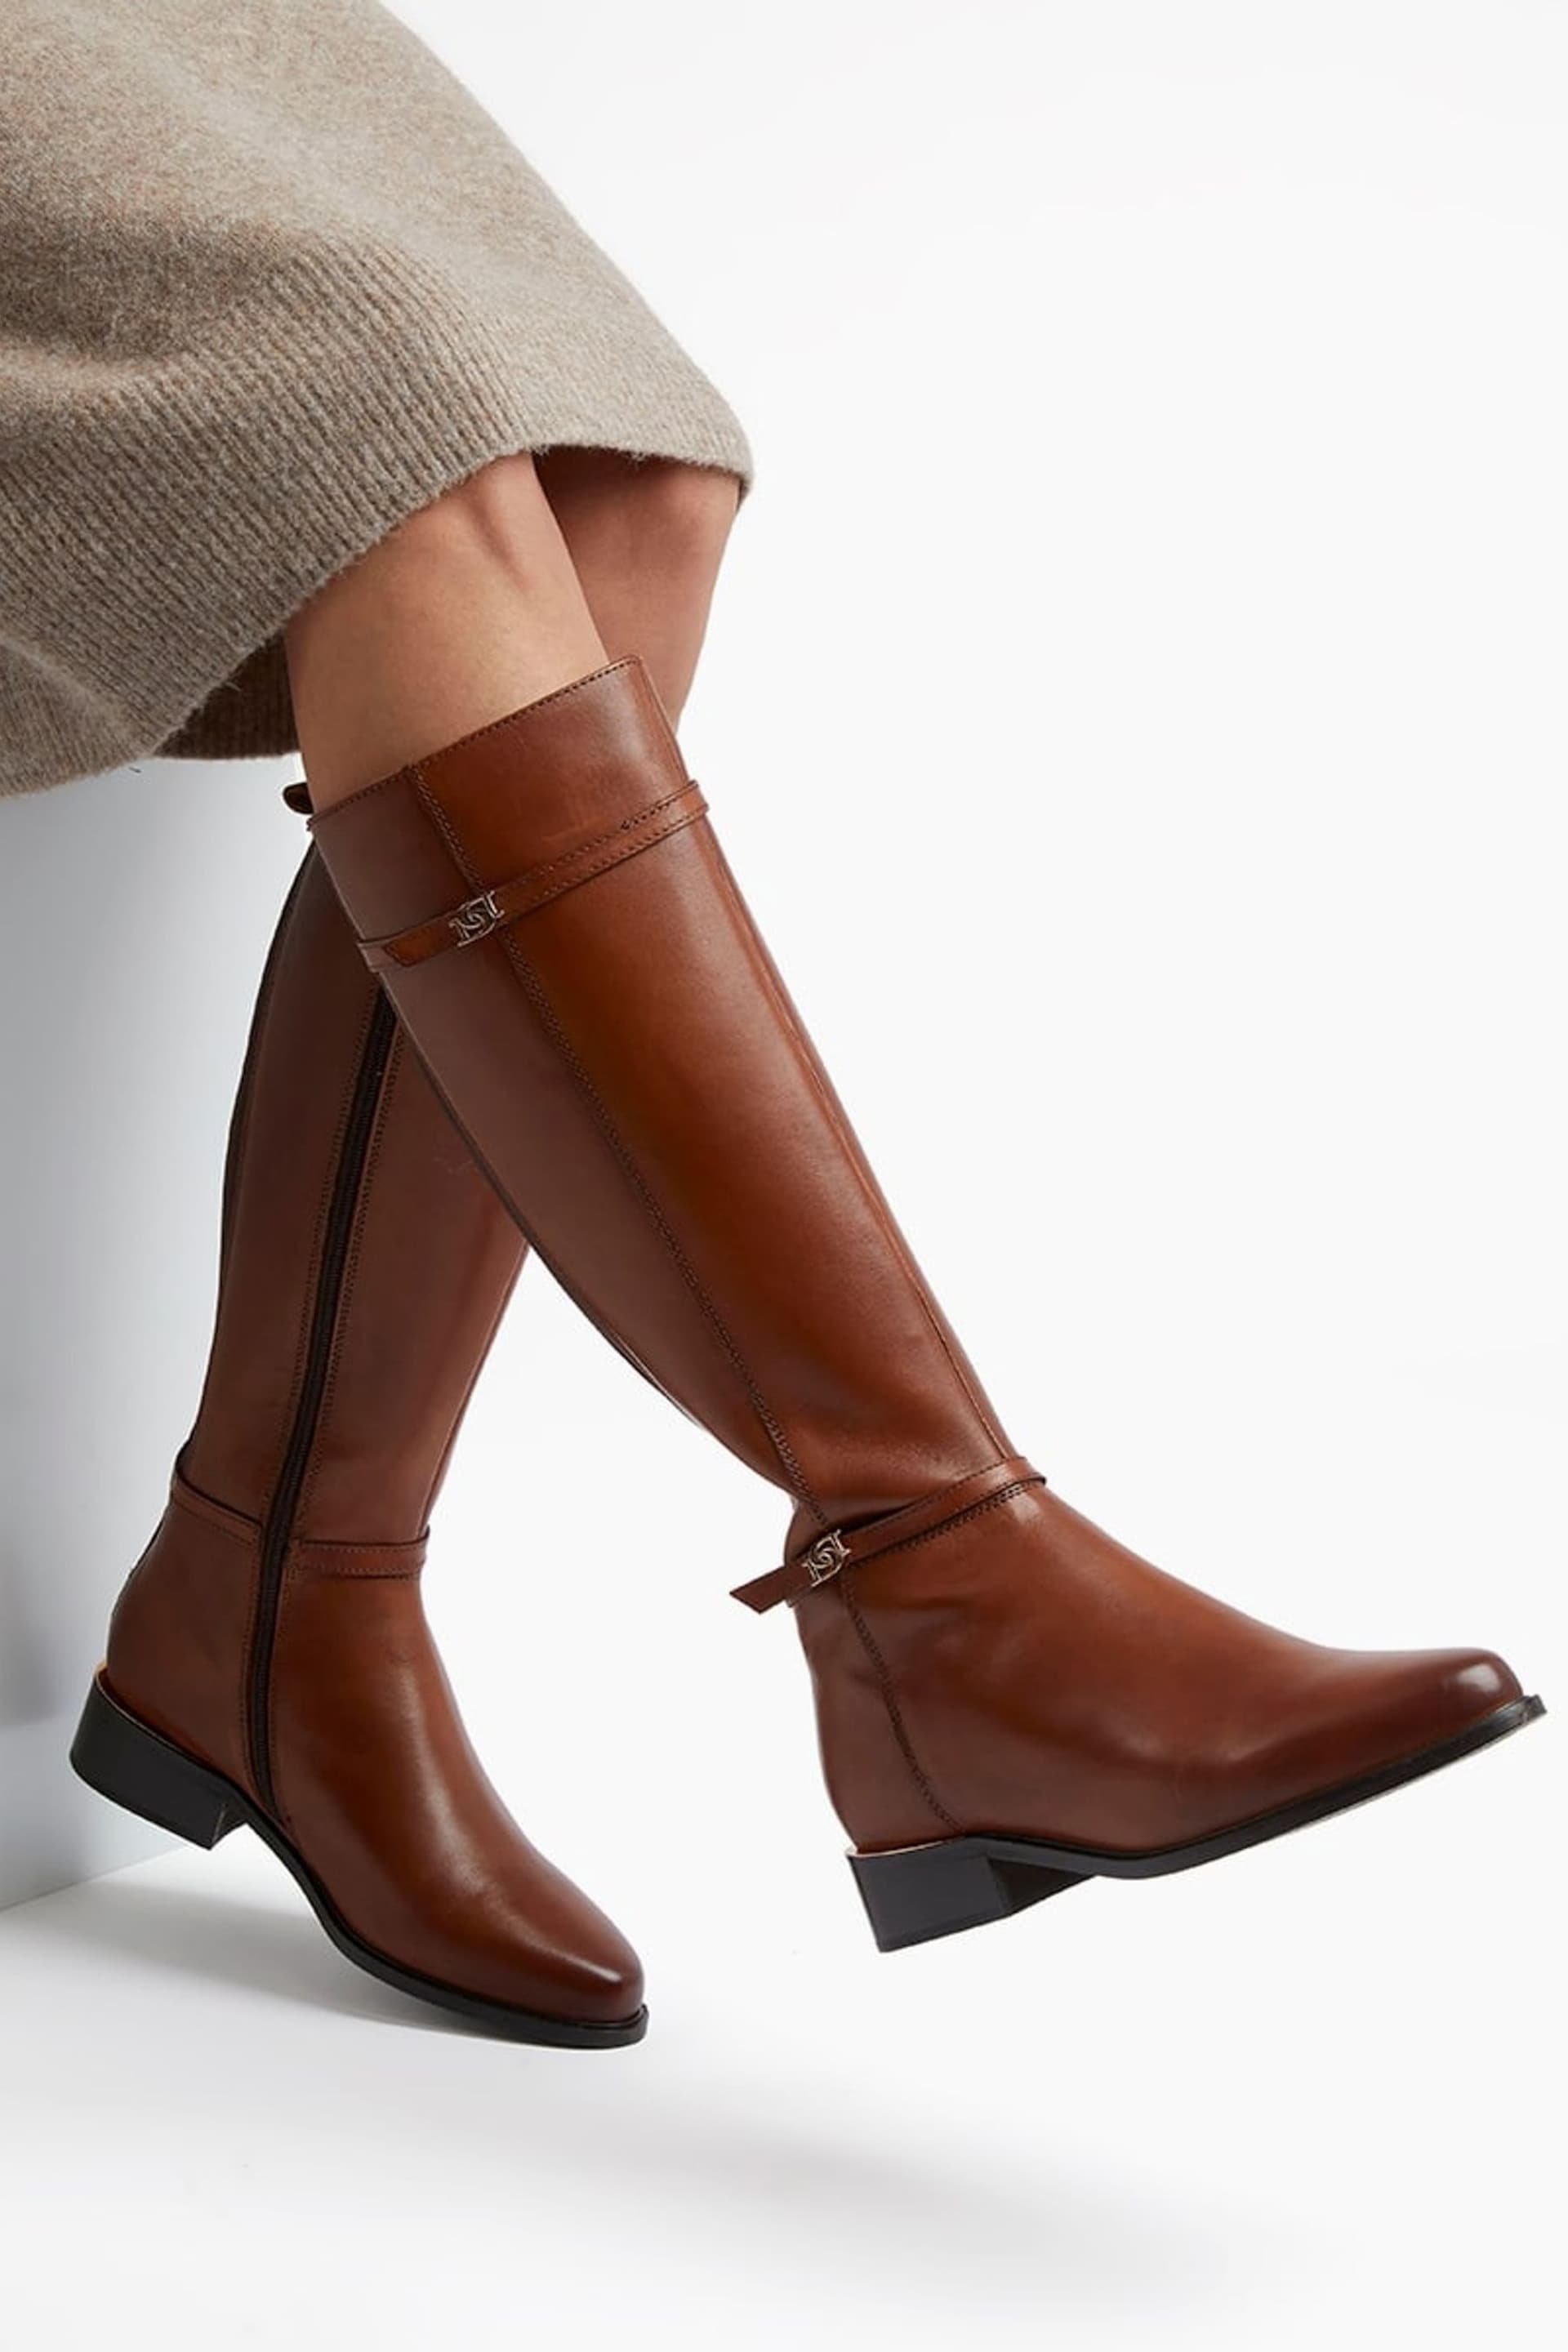 Dune London Brown Tap Buckle Trim High Boots - Image 2 of 5